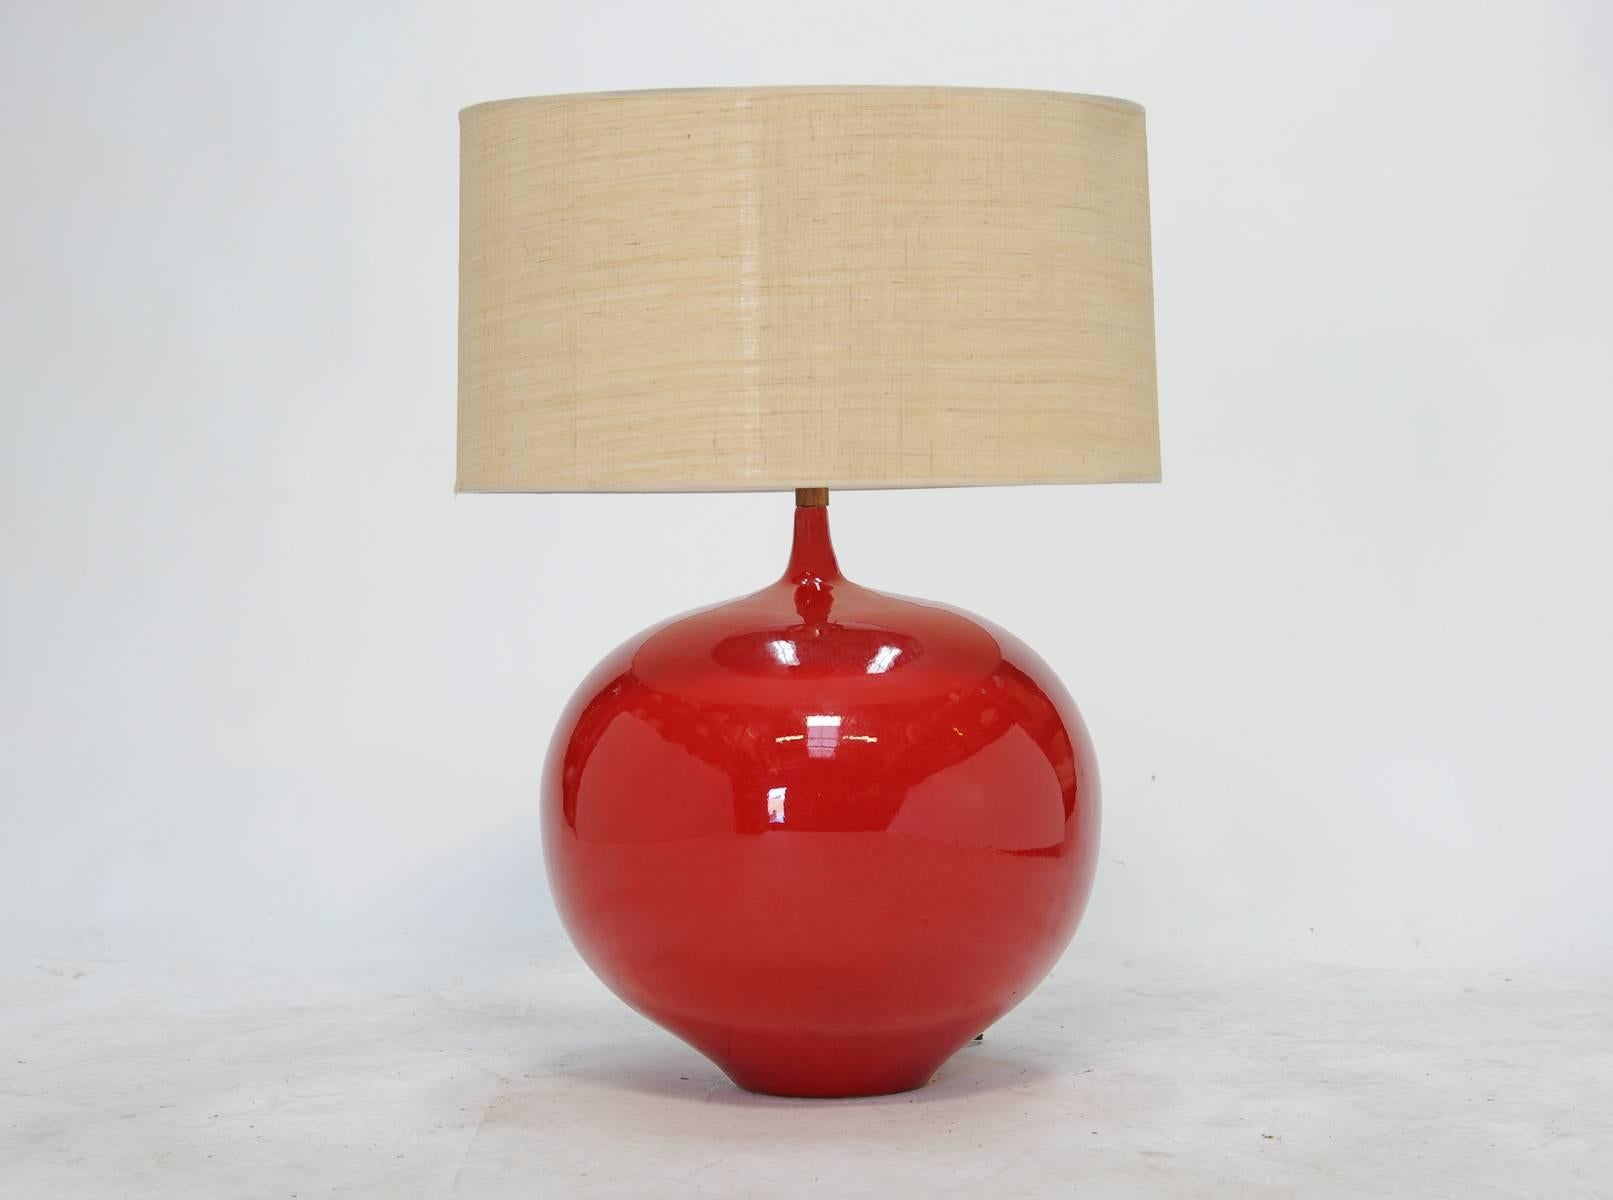 Wonderful red apple ceramic Danish extra large lamp. This is a beautiful lamp for a home or office.sold without the shade.